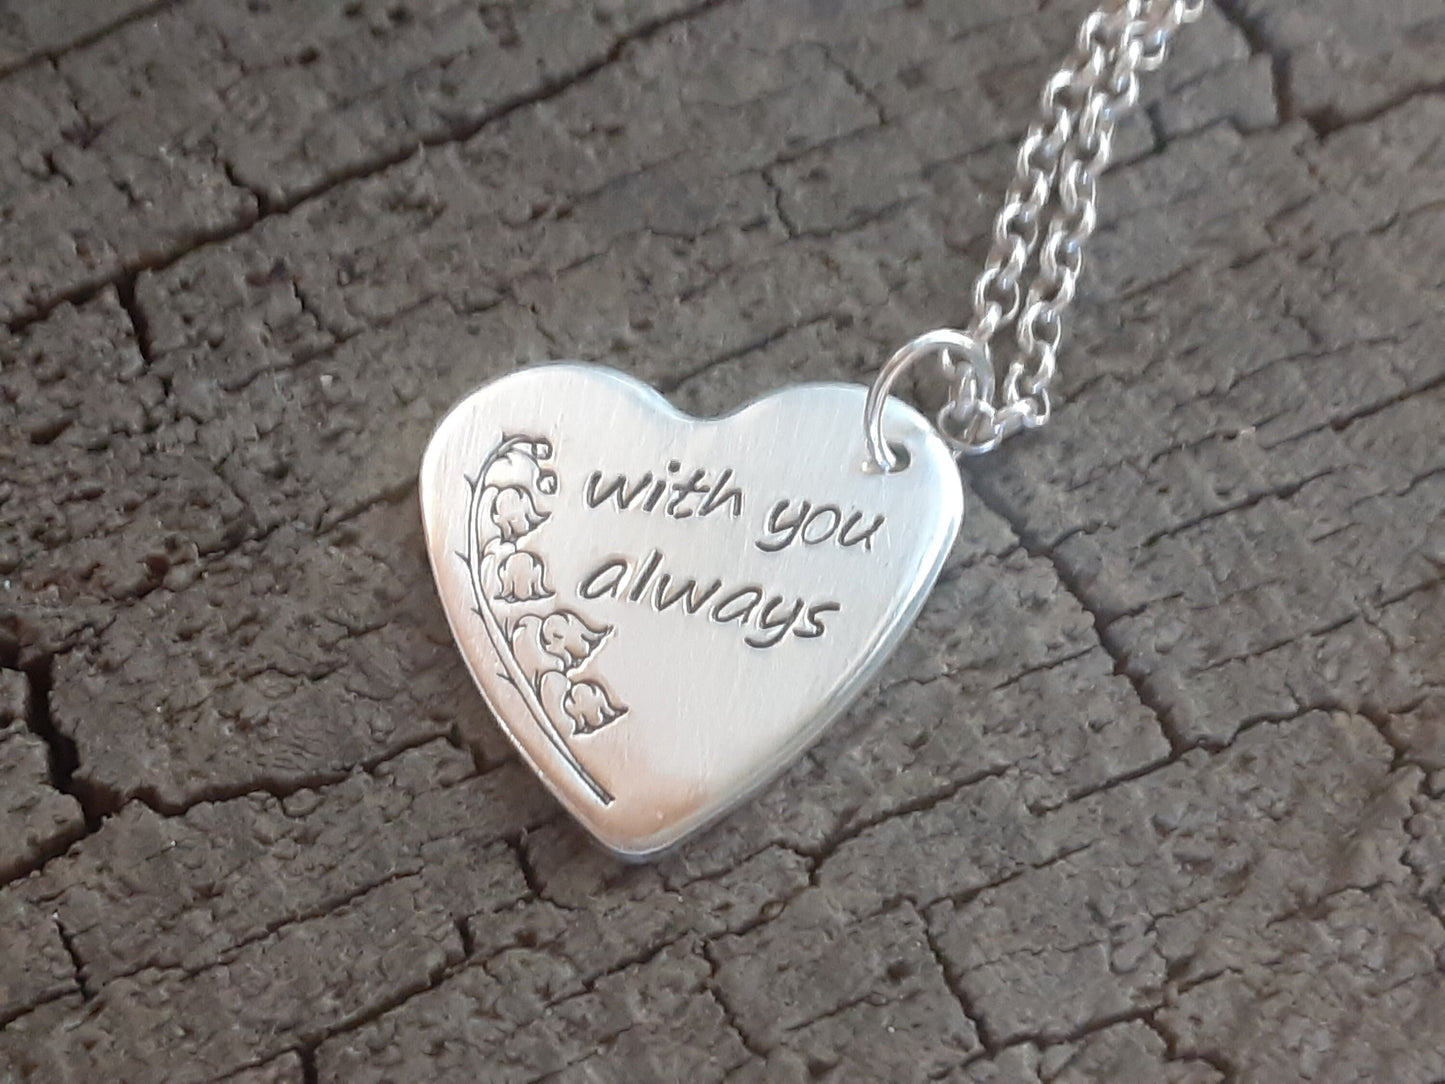 Memorial sterling silver heart necklace with you always